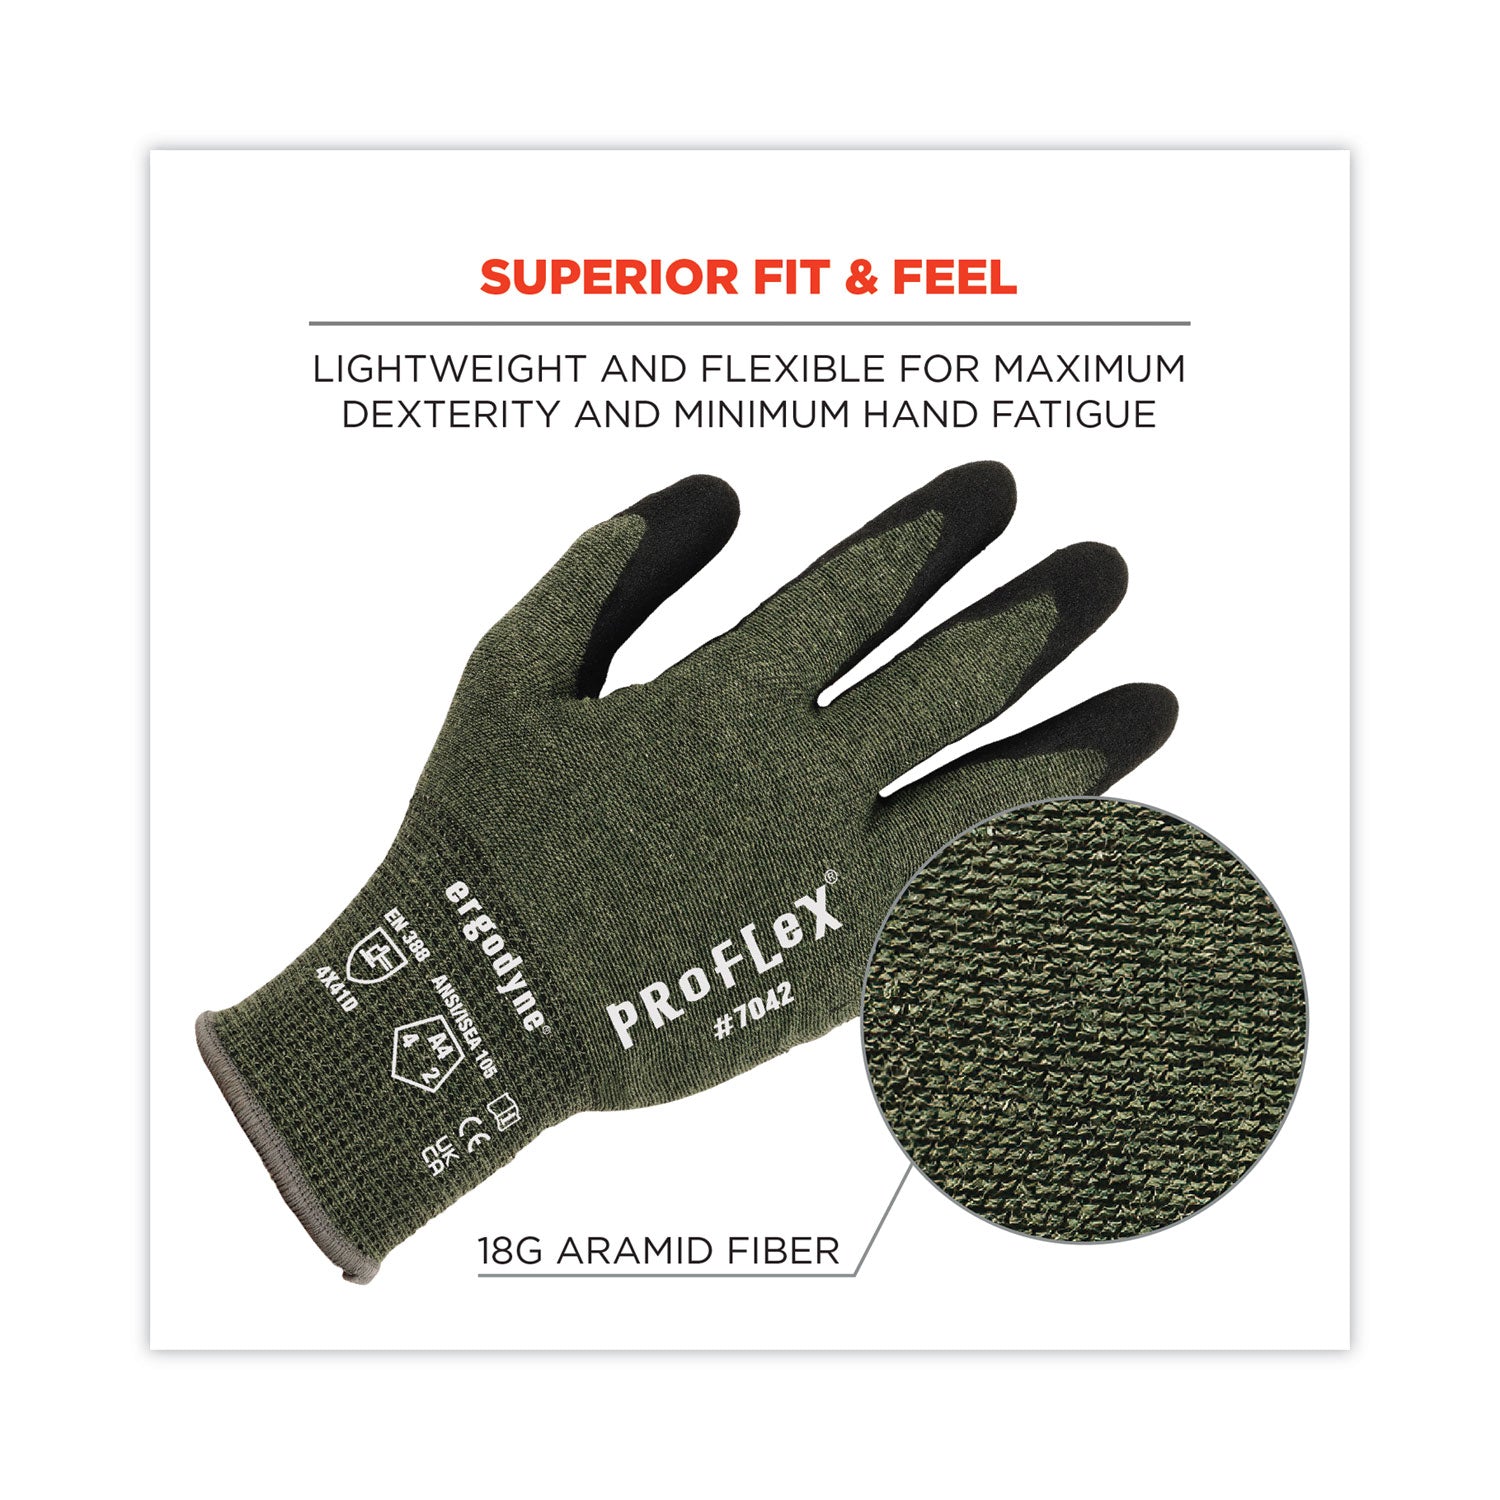 proflex-7042-ansi-a4-nitrile-coated-cr-gloves-green-x-large-pair-ships-in-1-3-business-days_ego10345 - 2